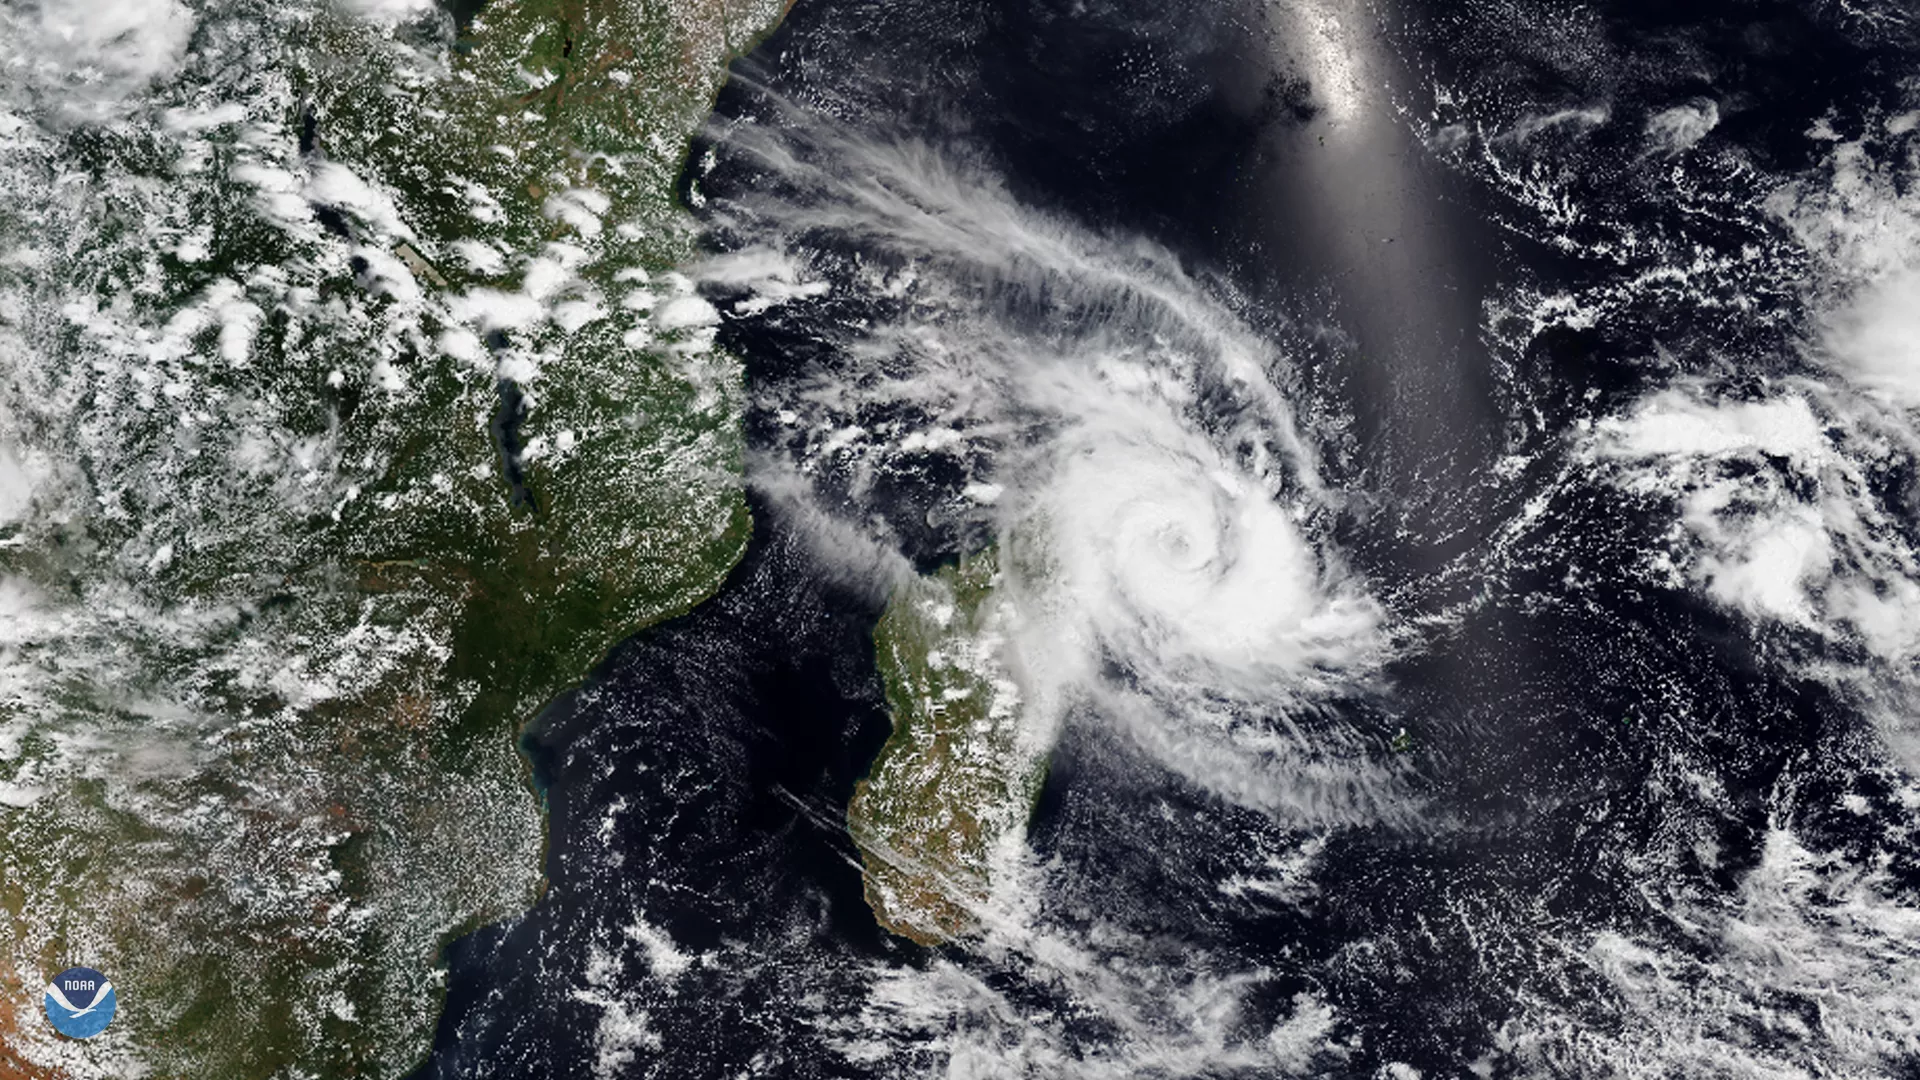 Satellite view of Tropical Cyclone Herold, captured by NOAA-20 on March 15, 2020.